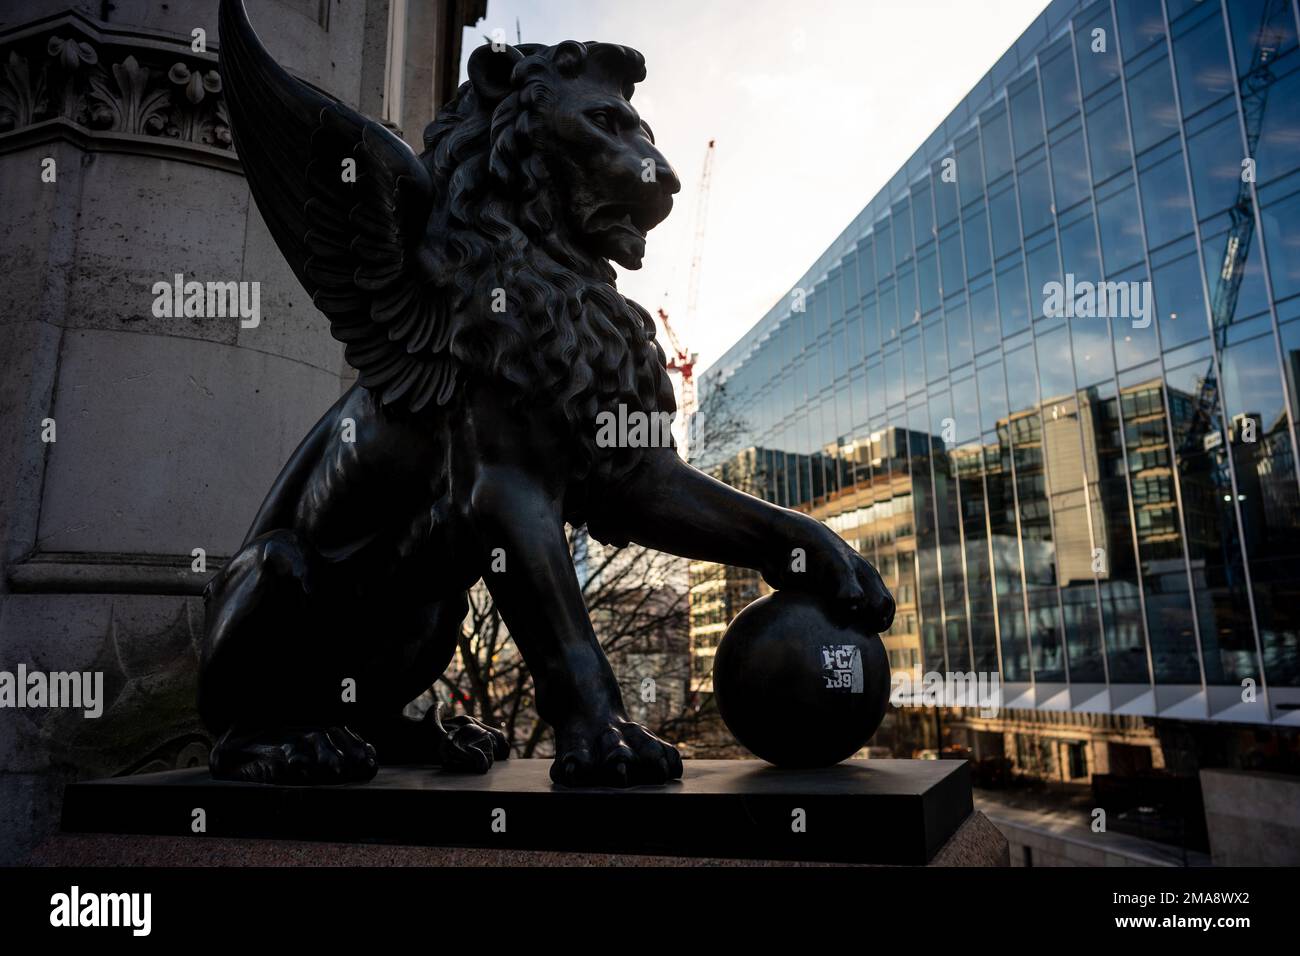 Winged Lion statue on Holborn Viaduct, the first flyover, was opened by Queen Victoria in 1869. Stock Photo